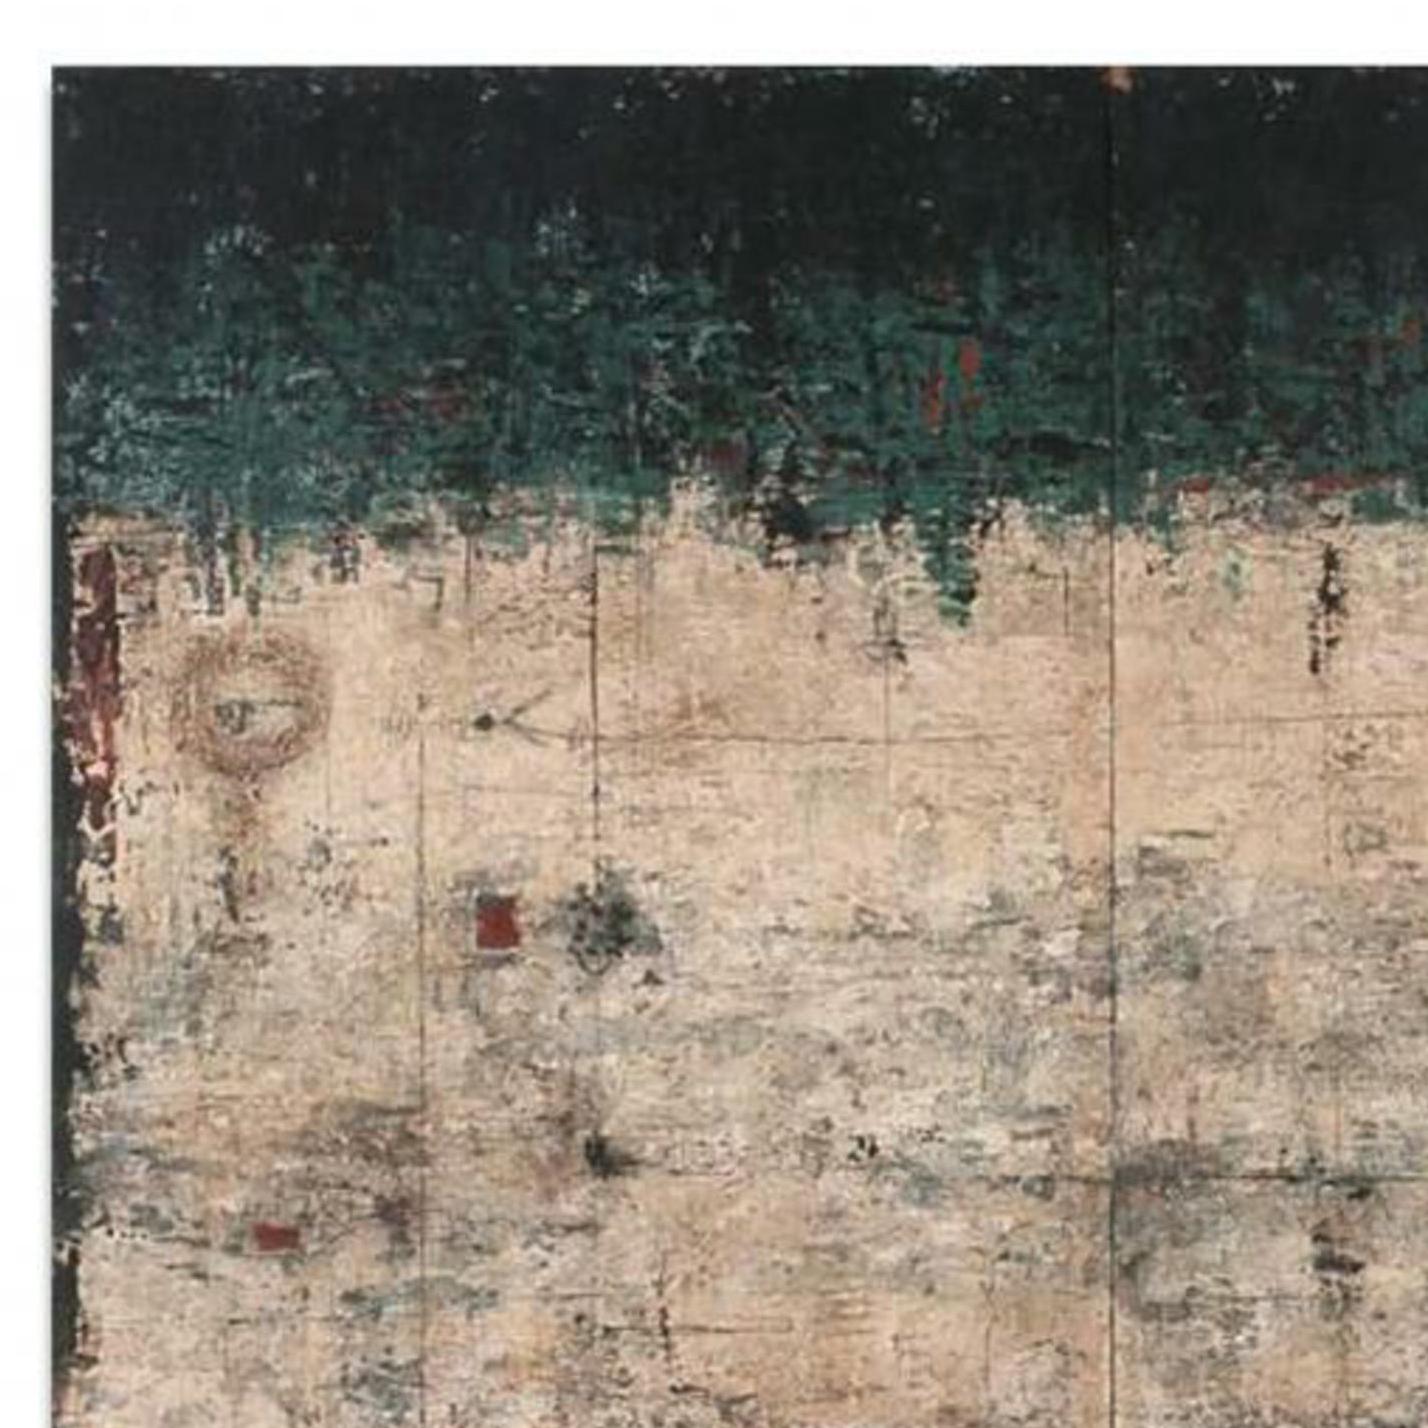 Drawing Conclusions by artist Patricia Oblack is a brown, grey, red, black, and teal contemporary abstract mixed media on panel that measures 48 x 64 and is priced at $7,400.

“Presently, I use color - layers and layers if color and texture to